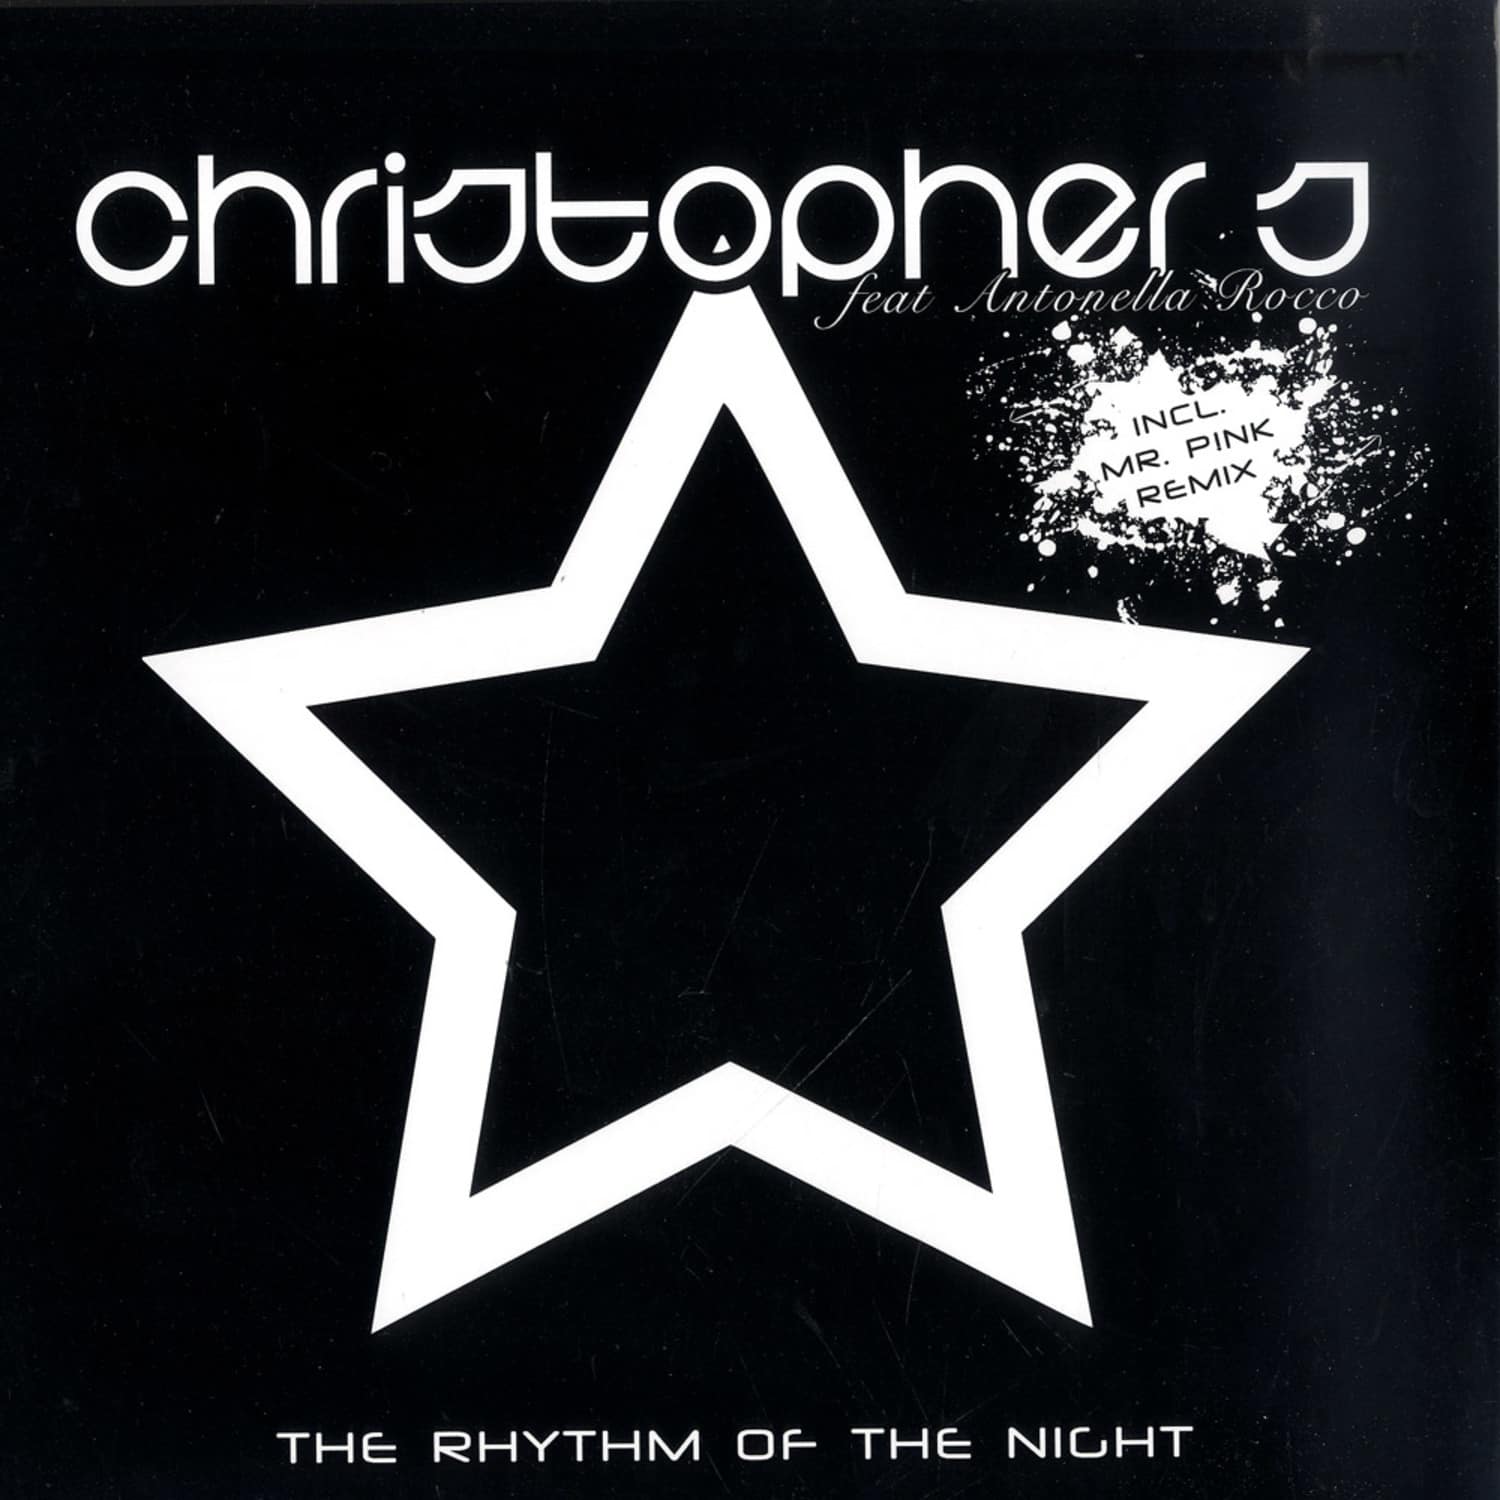 Christopher S. feat. Antonella Rocco - THE RHYTHM OF THE NIGHT